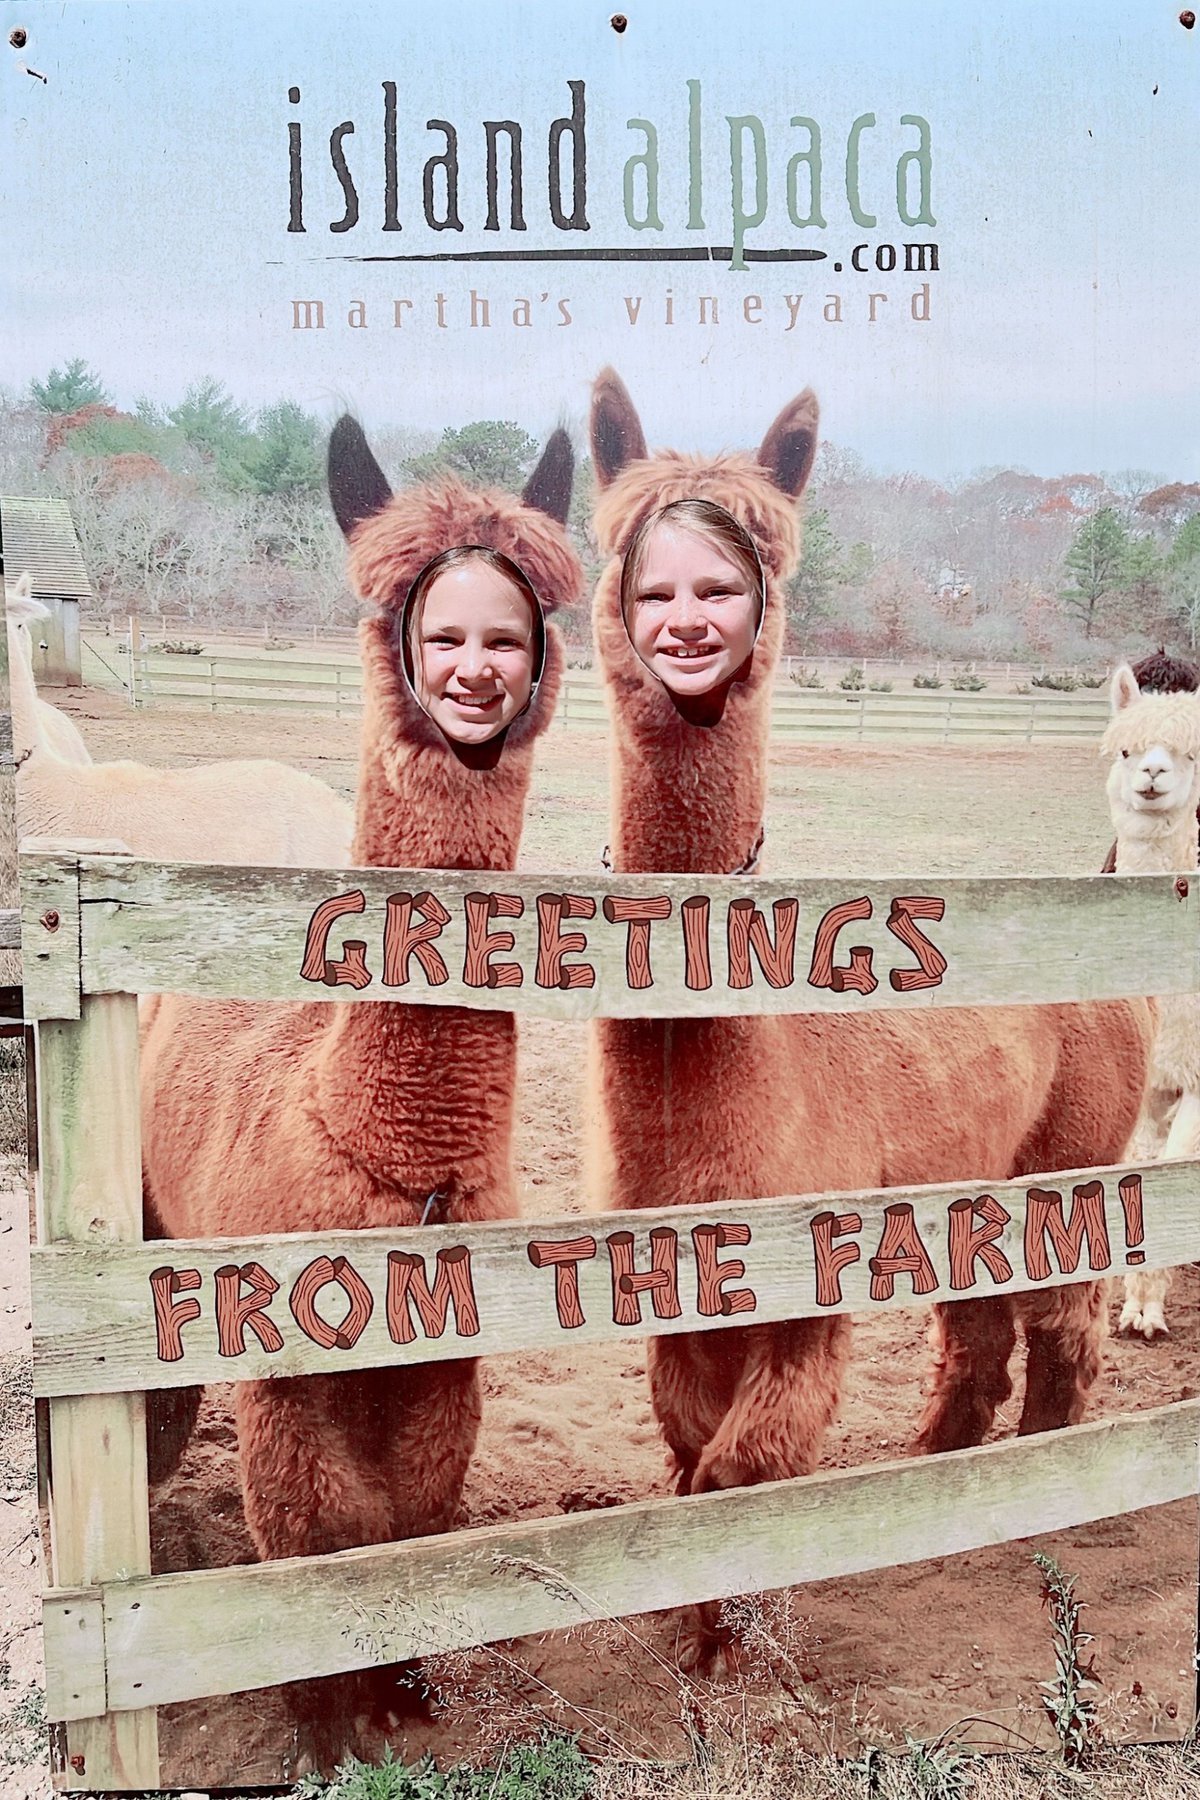 Two little girls in a photo opportunity for Island Alpacas